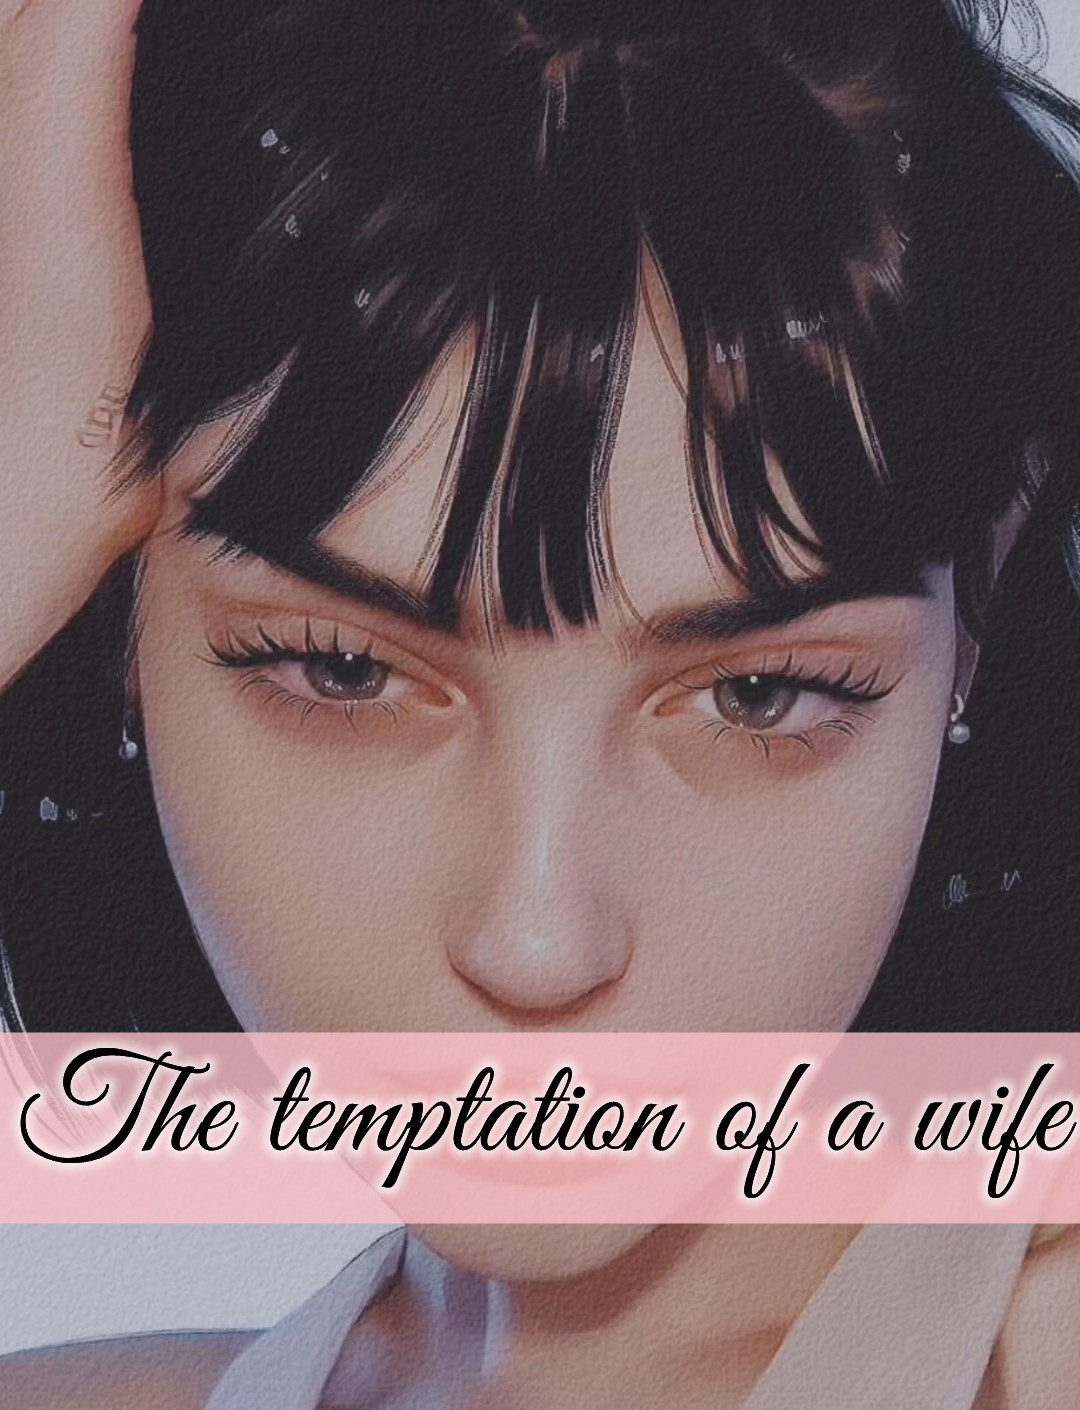 The temptation of a wife